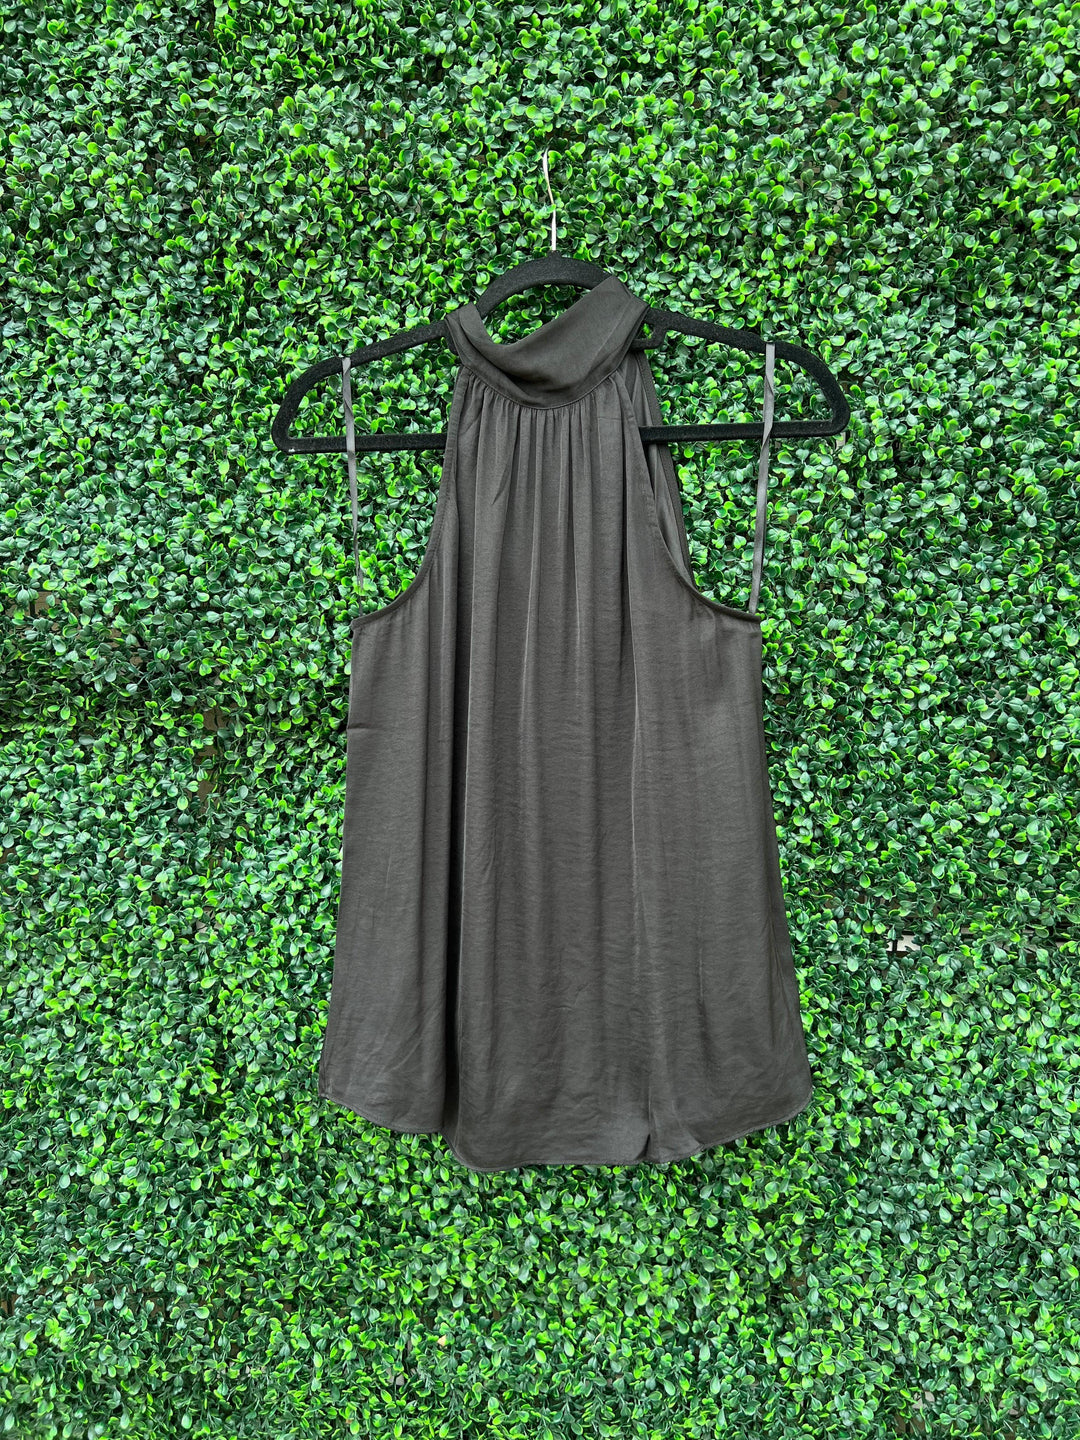 Tres Chic Dress Boutique on Houtson with silky tops can can be worn front and back in black